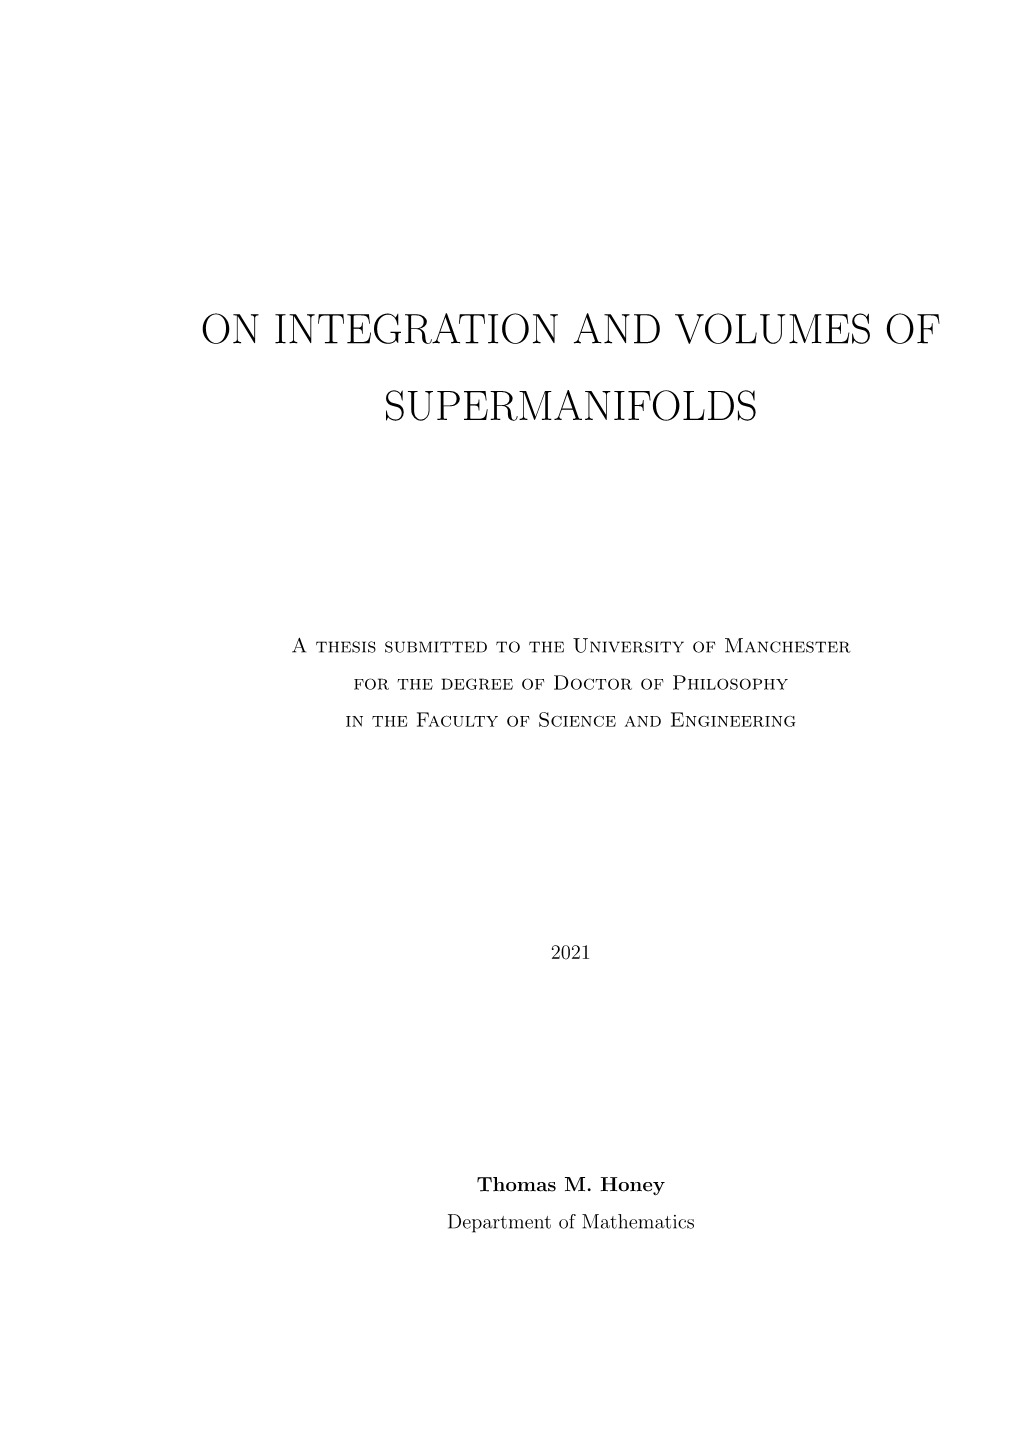 On Integration and Volumes of Supermanifolds